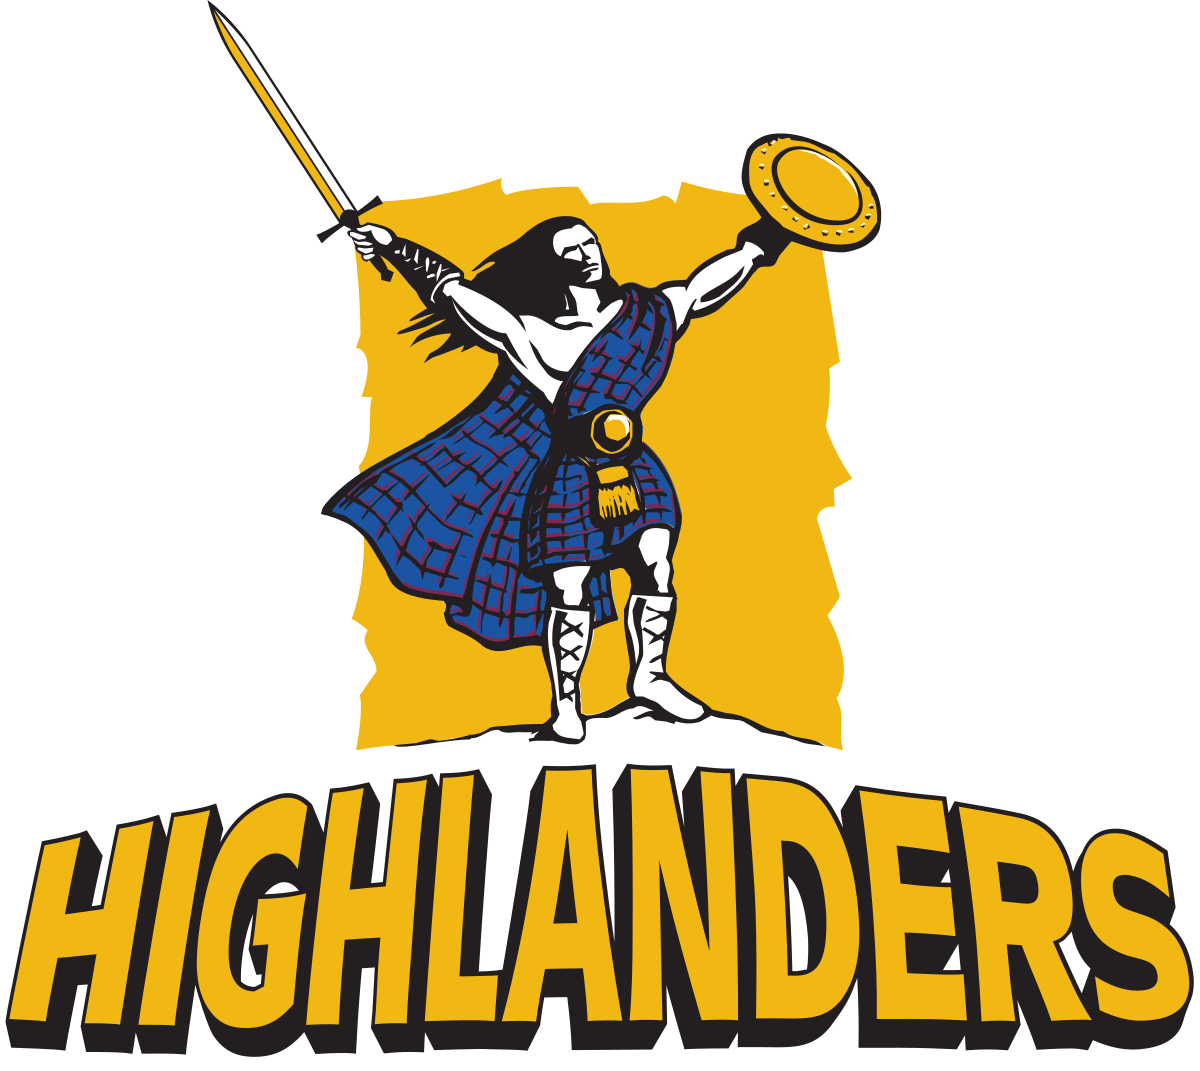 Highlanders (rugby union) - Wikipedia